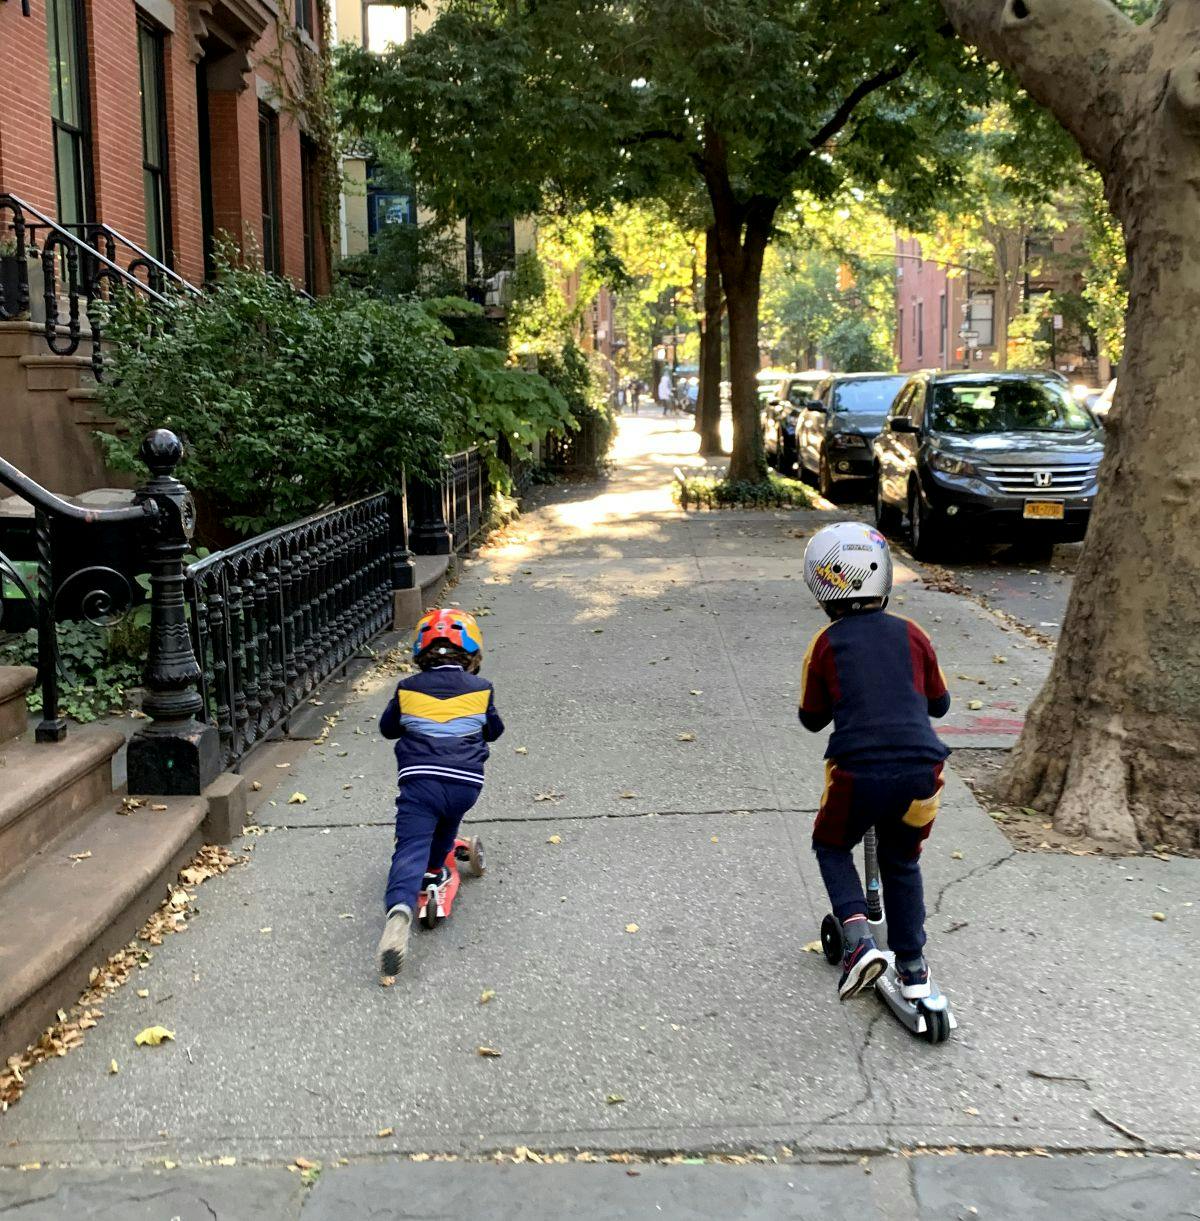 Children riding on scooters